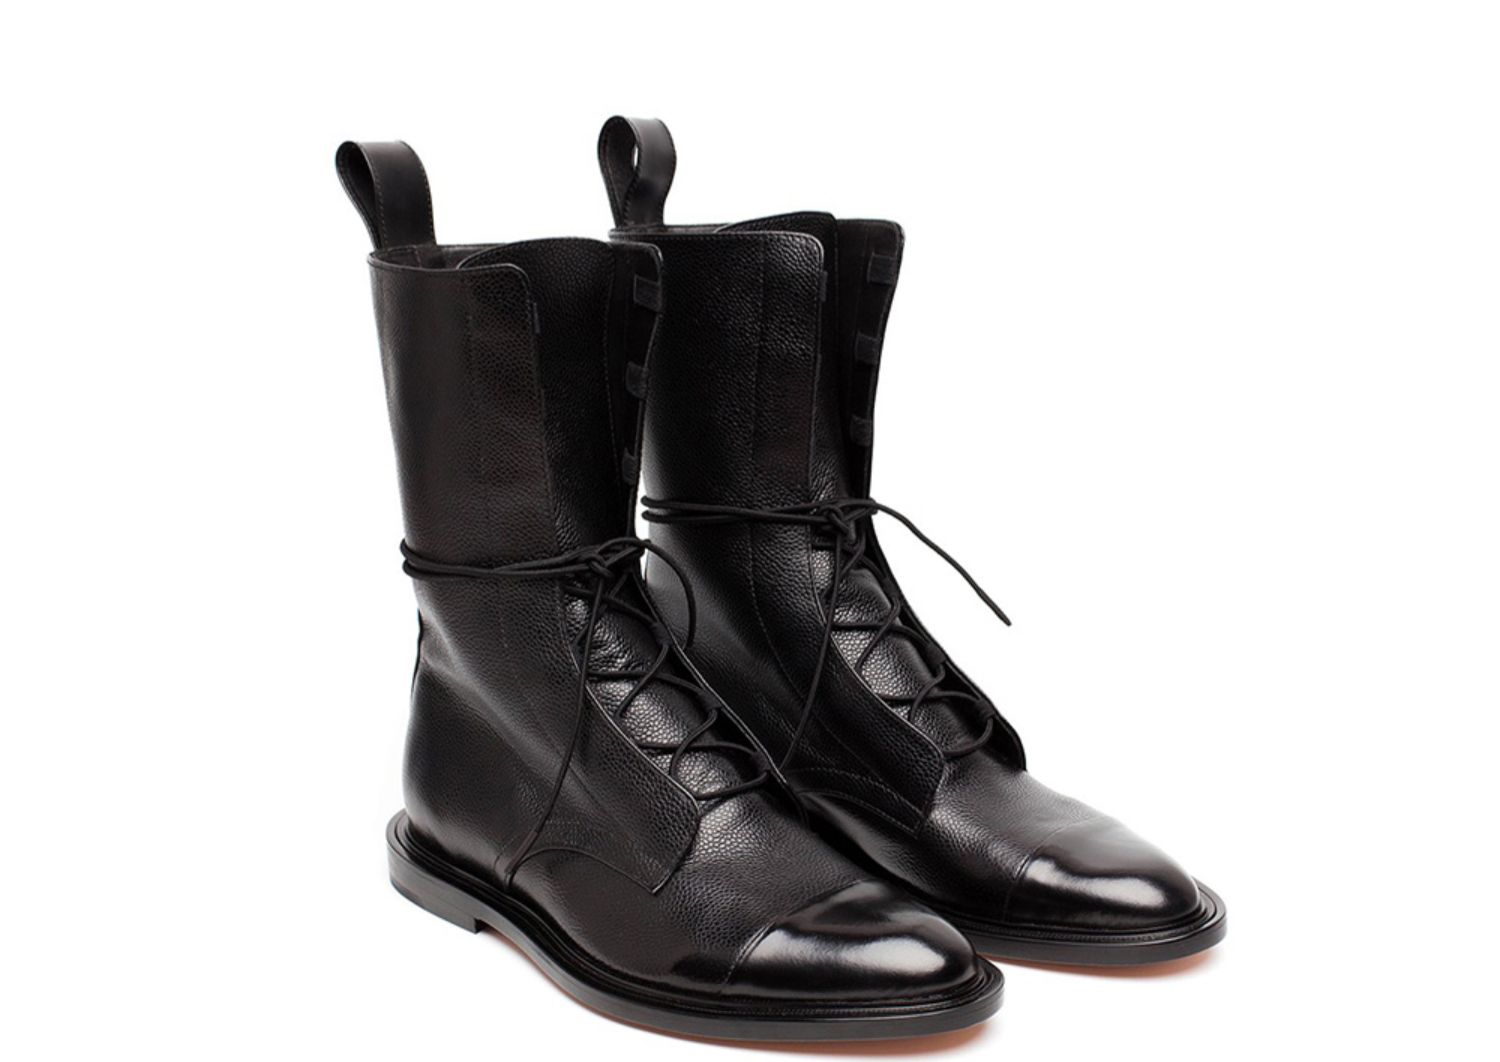 women's British wind with high-top flat boots レースアップレザー